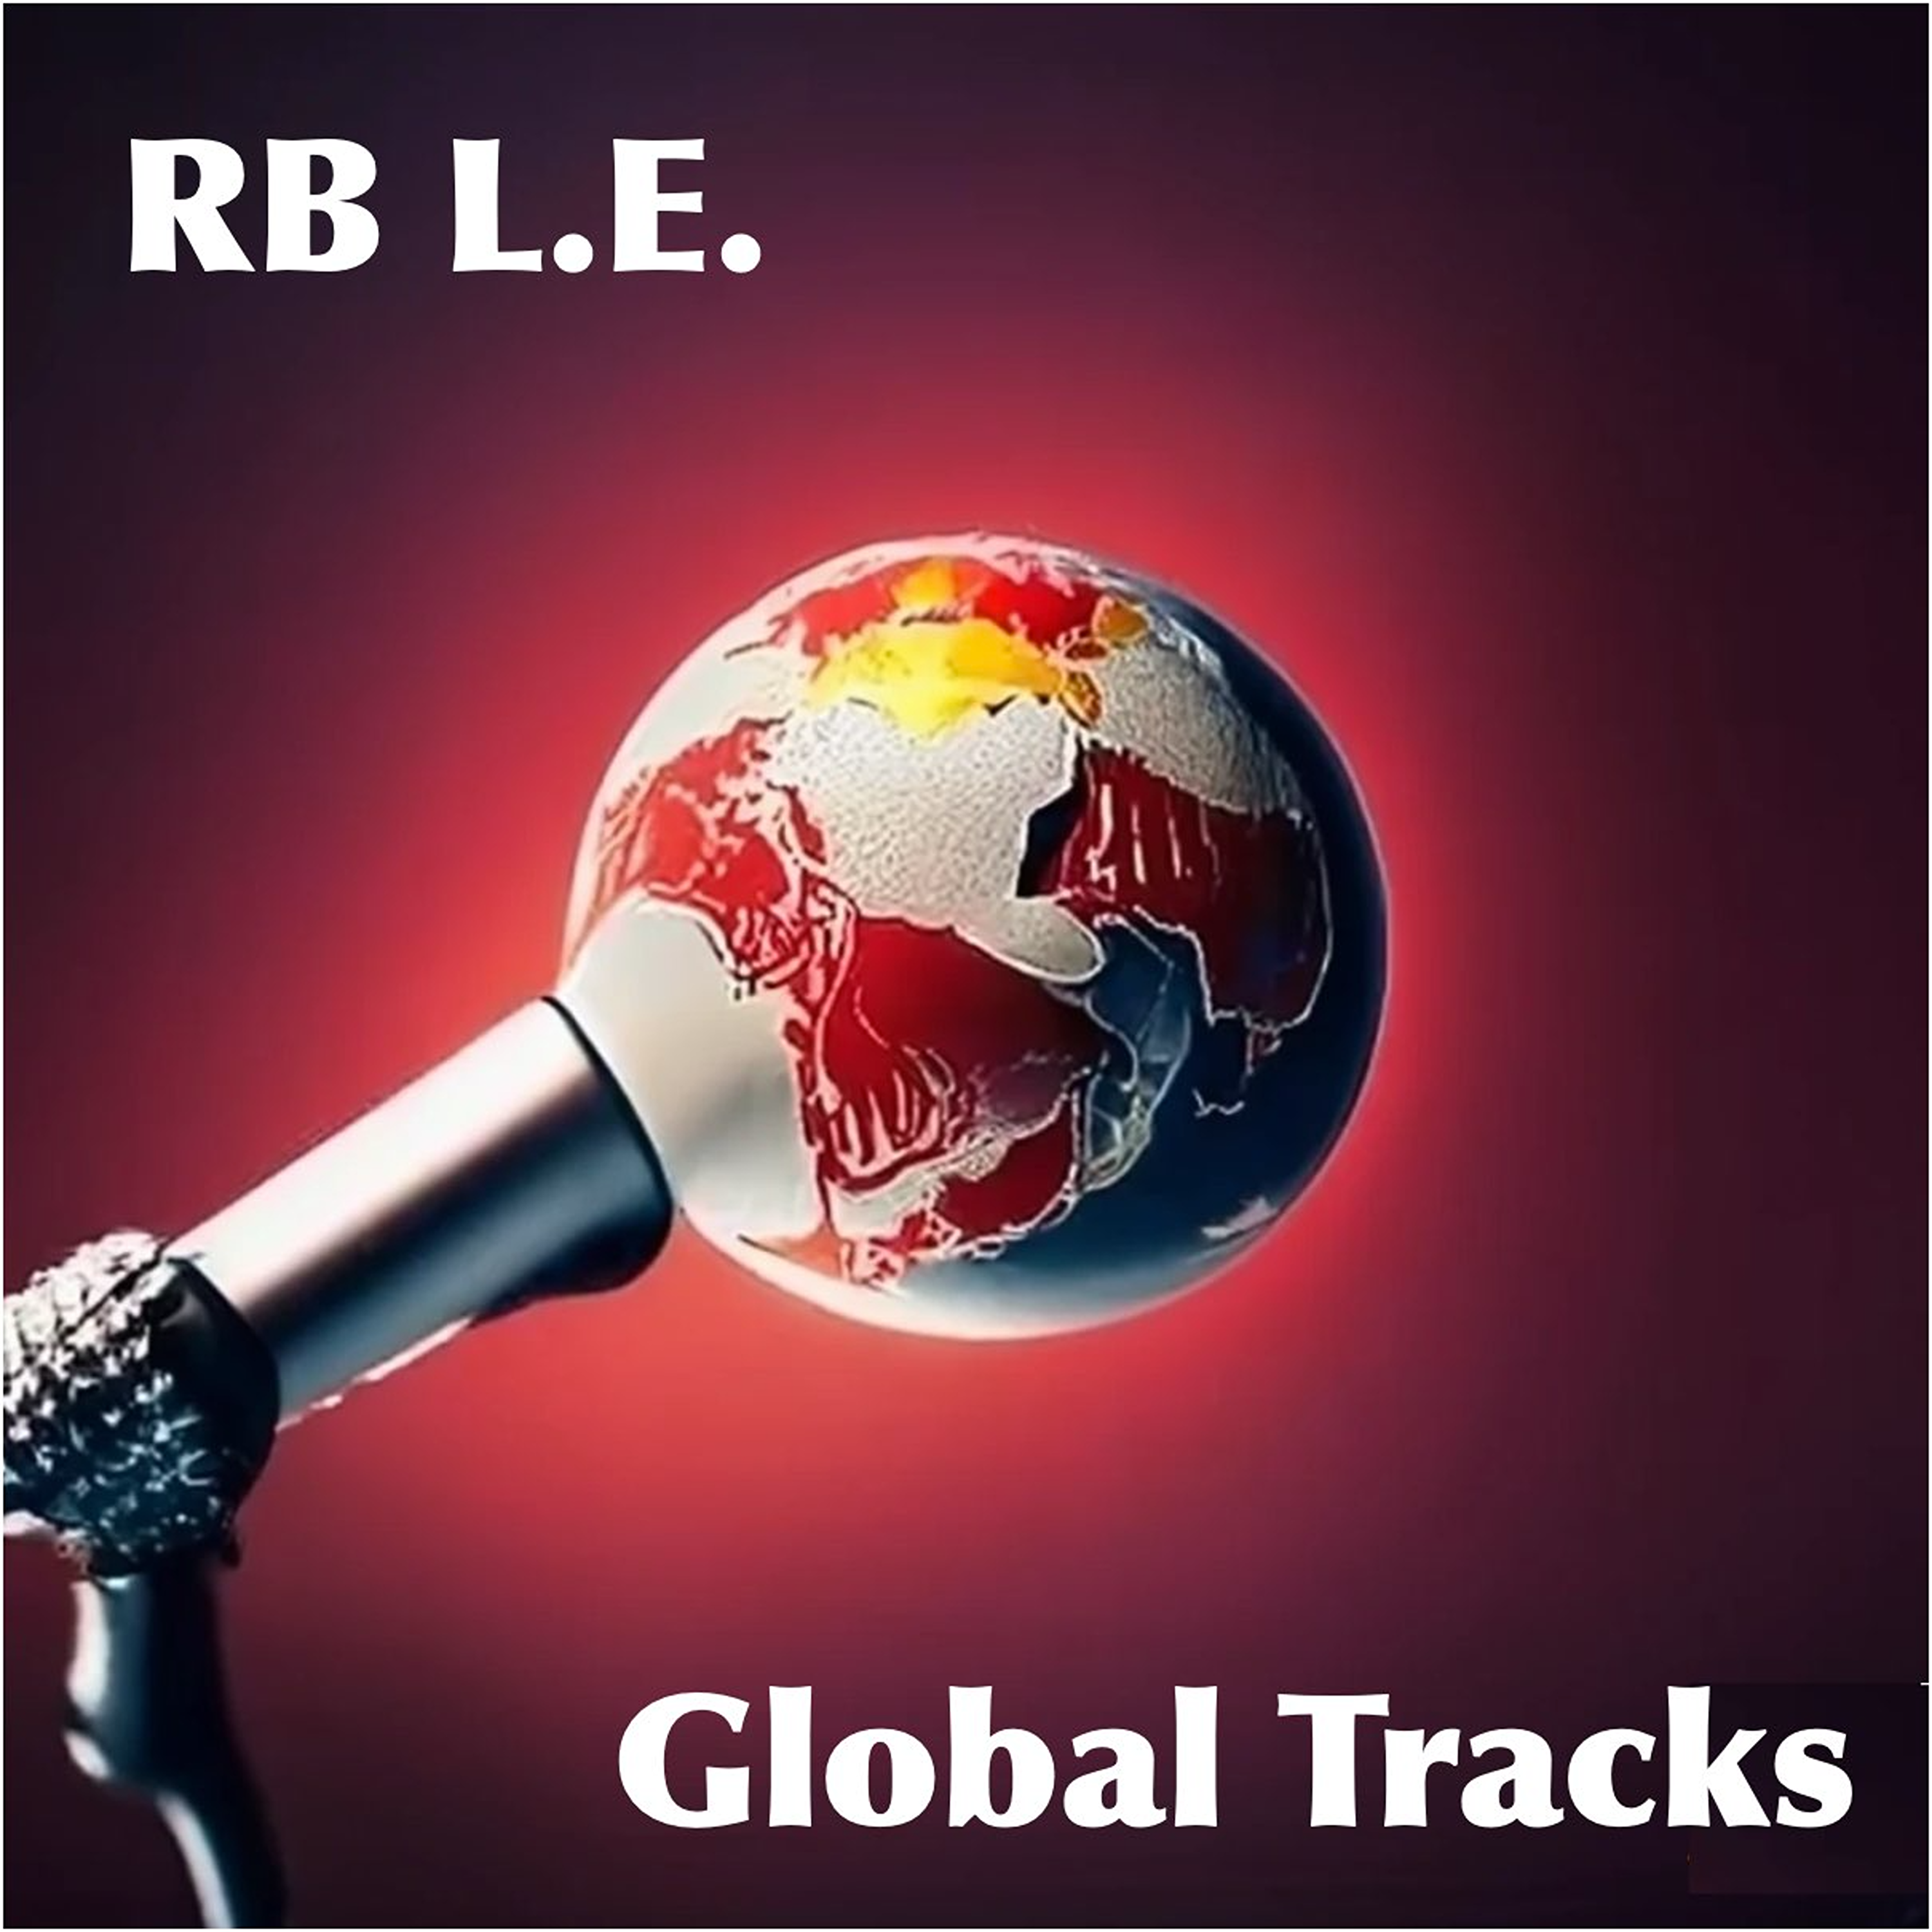 RB L.E. Global Tracks - Our RB Leipzig Podcast